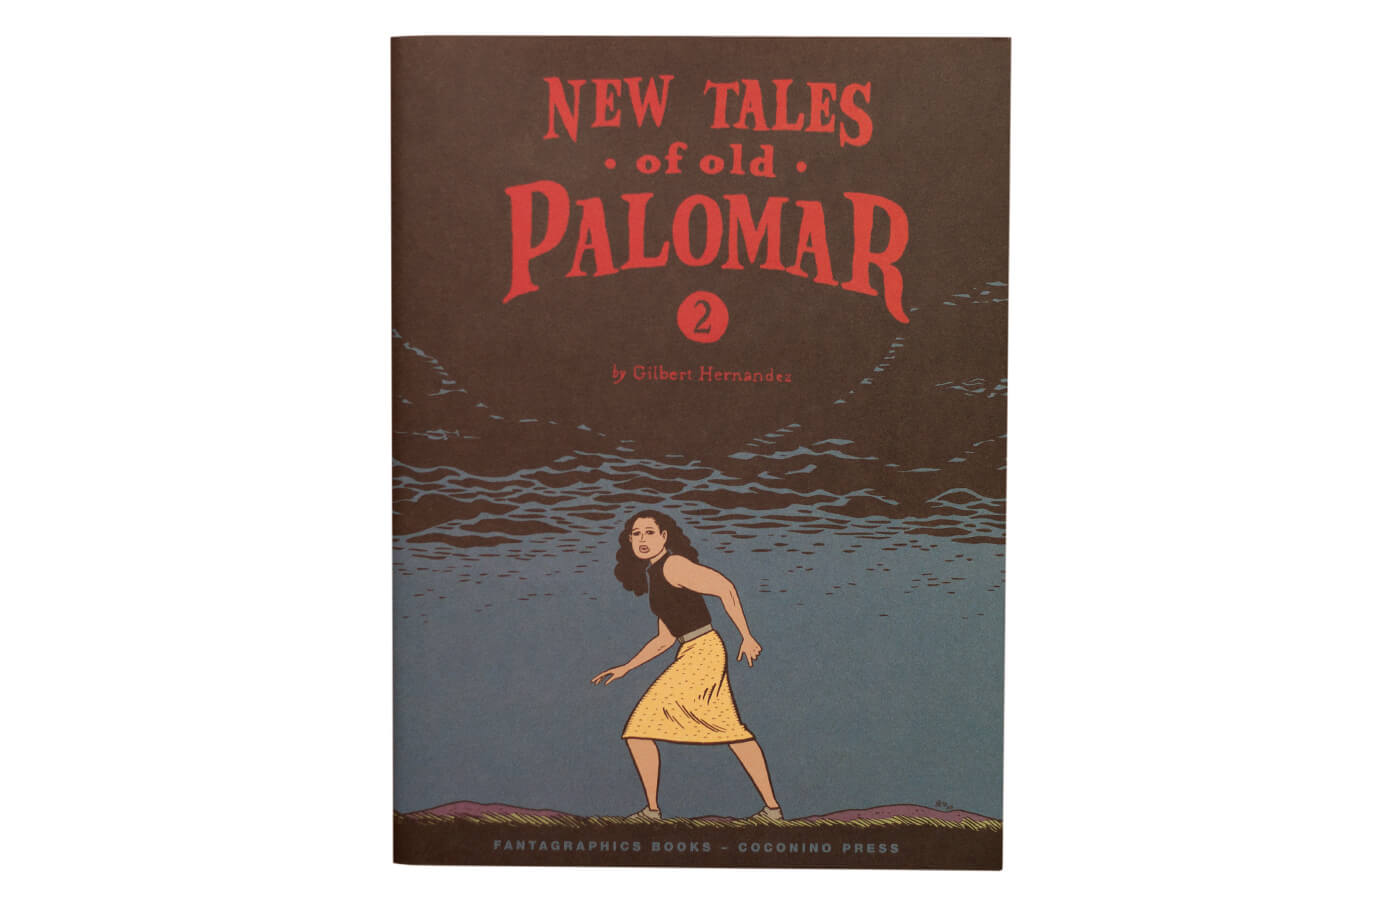 New Tales of old Palomar #2